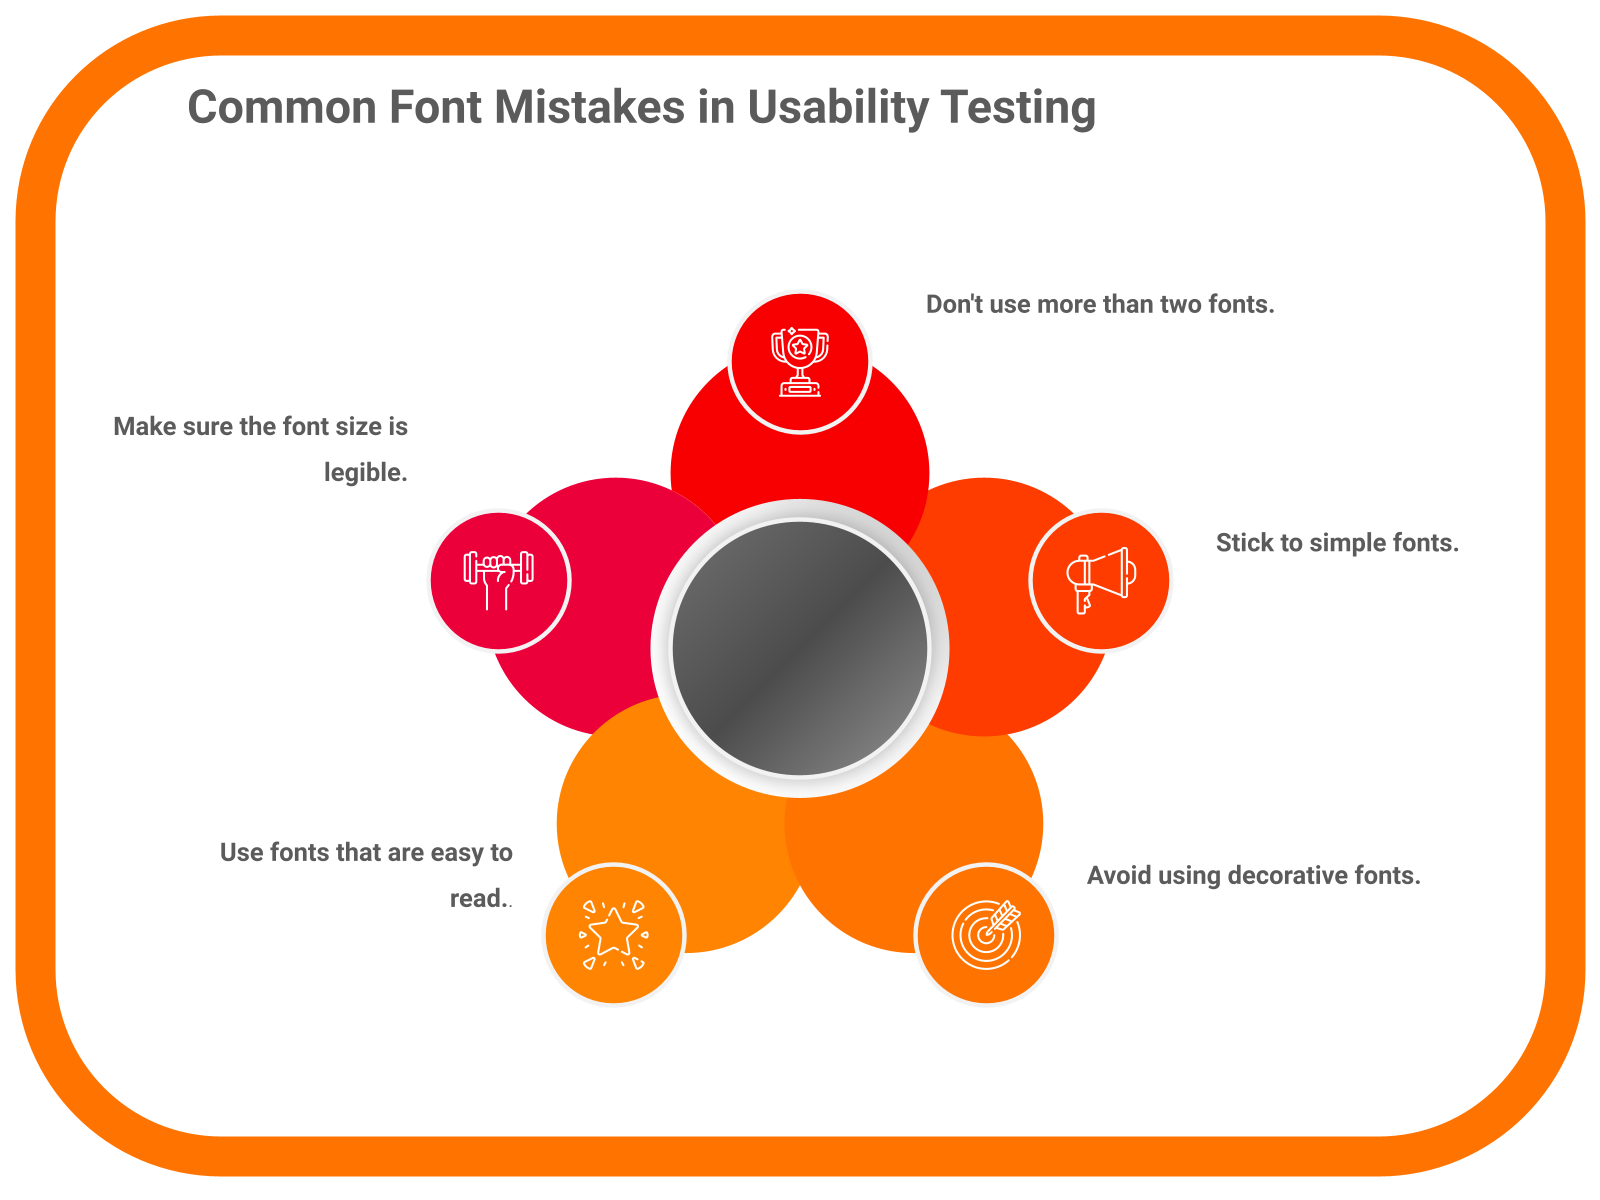 Common Font Mistakes in Usability Testing